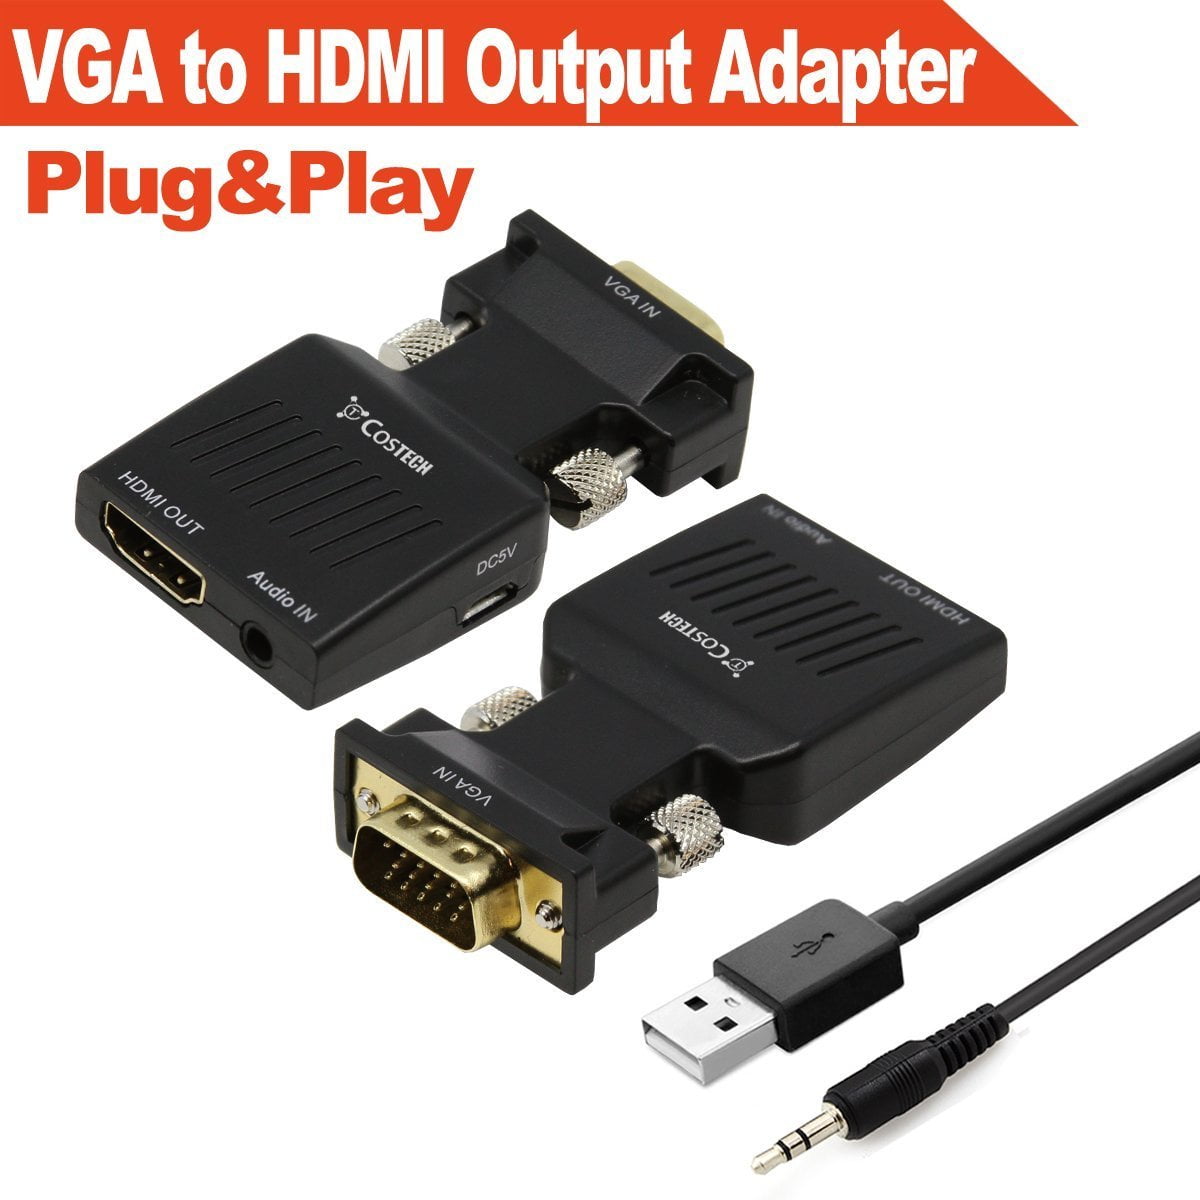 VGA to HDMI-1 Pack Monitors displayers,Laptop Desktop Computer VGA to HDMI Output Costech HD 1080p TV AV HDTV Video Cable Converter Adapter Plug and Play with Audio for HDTVs 